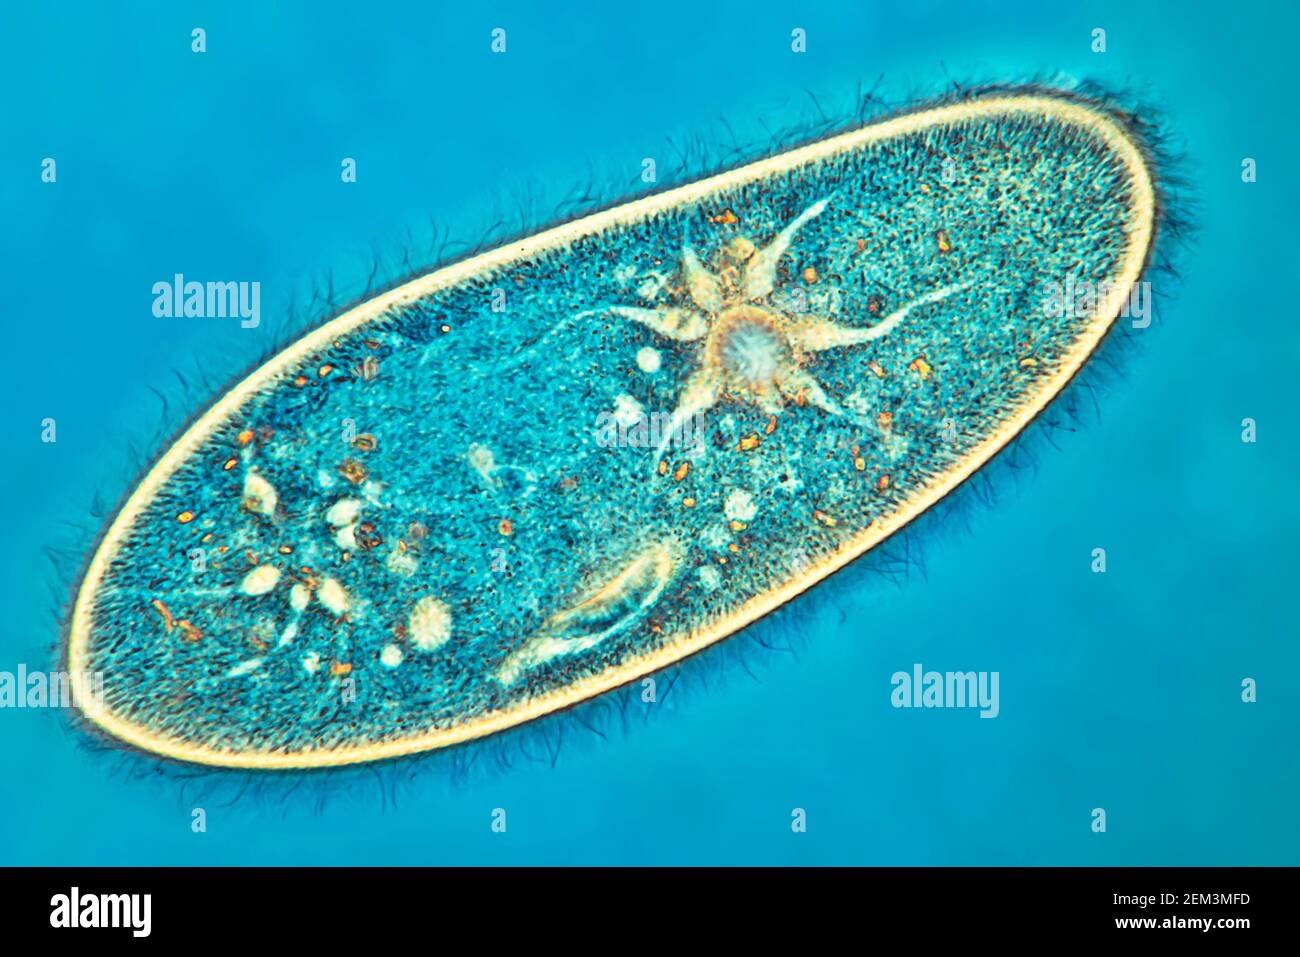 slipper animalcules (Paramecium caudatum), phase-contrast MRI image, magnification x100 related to 35mm, Germany Stock Photo